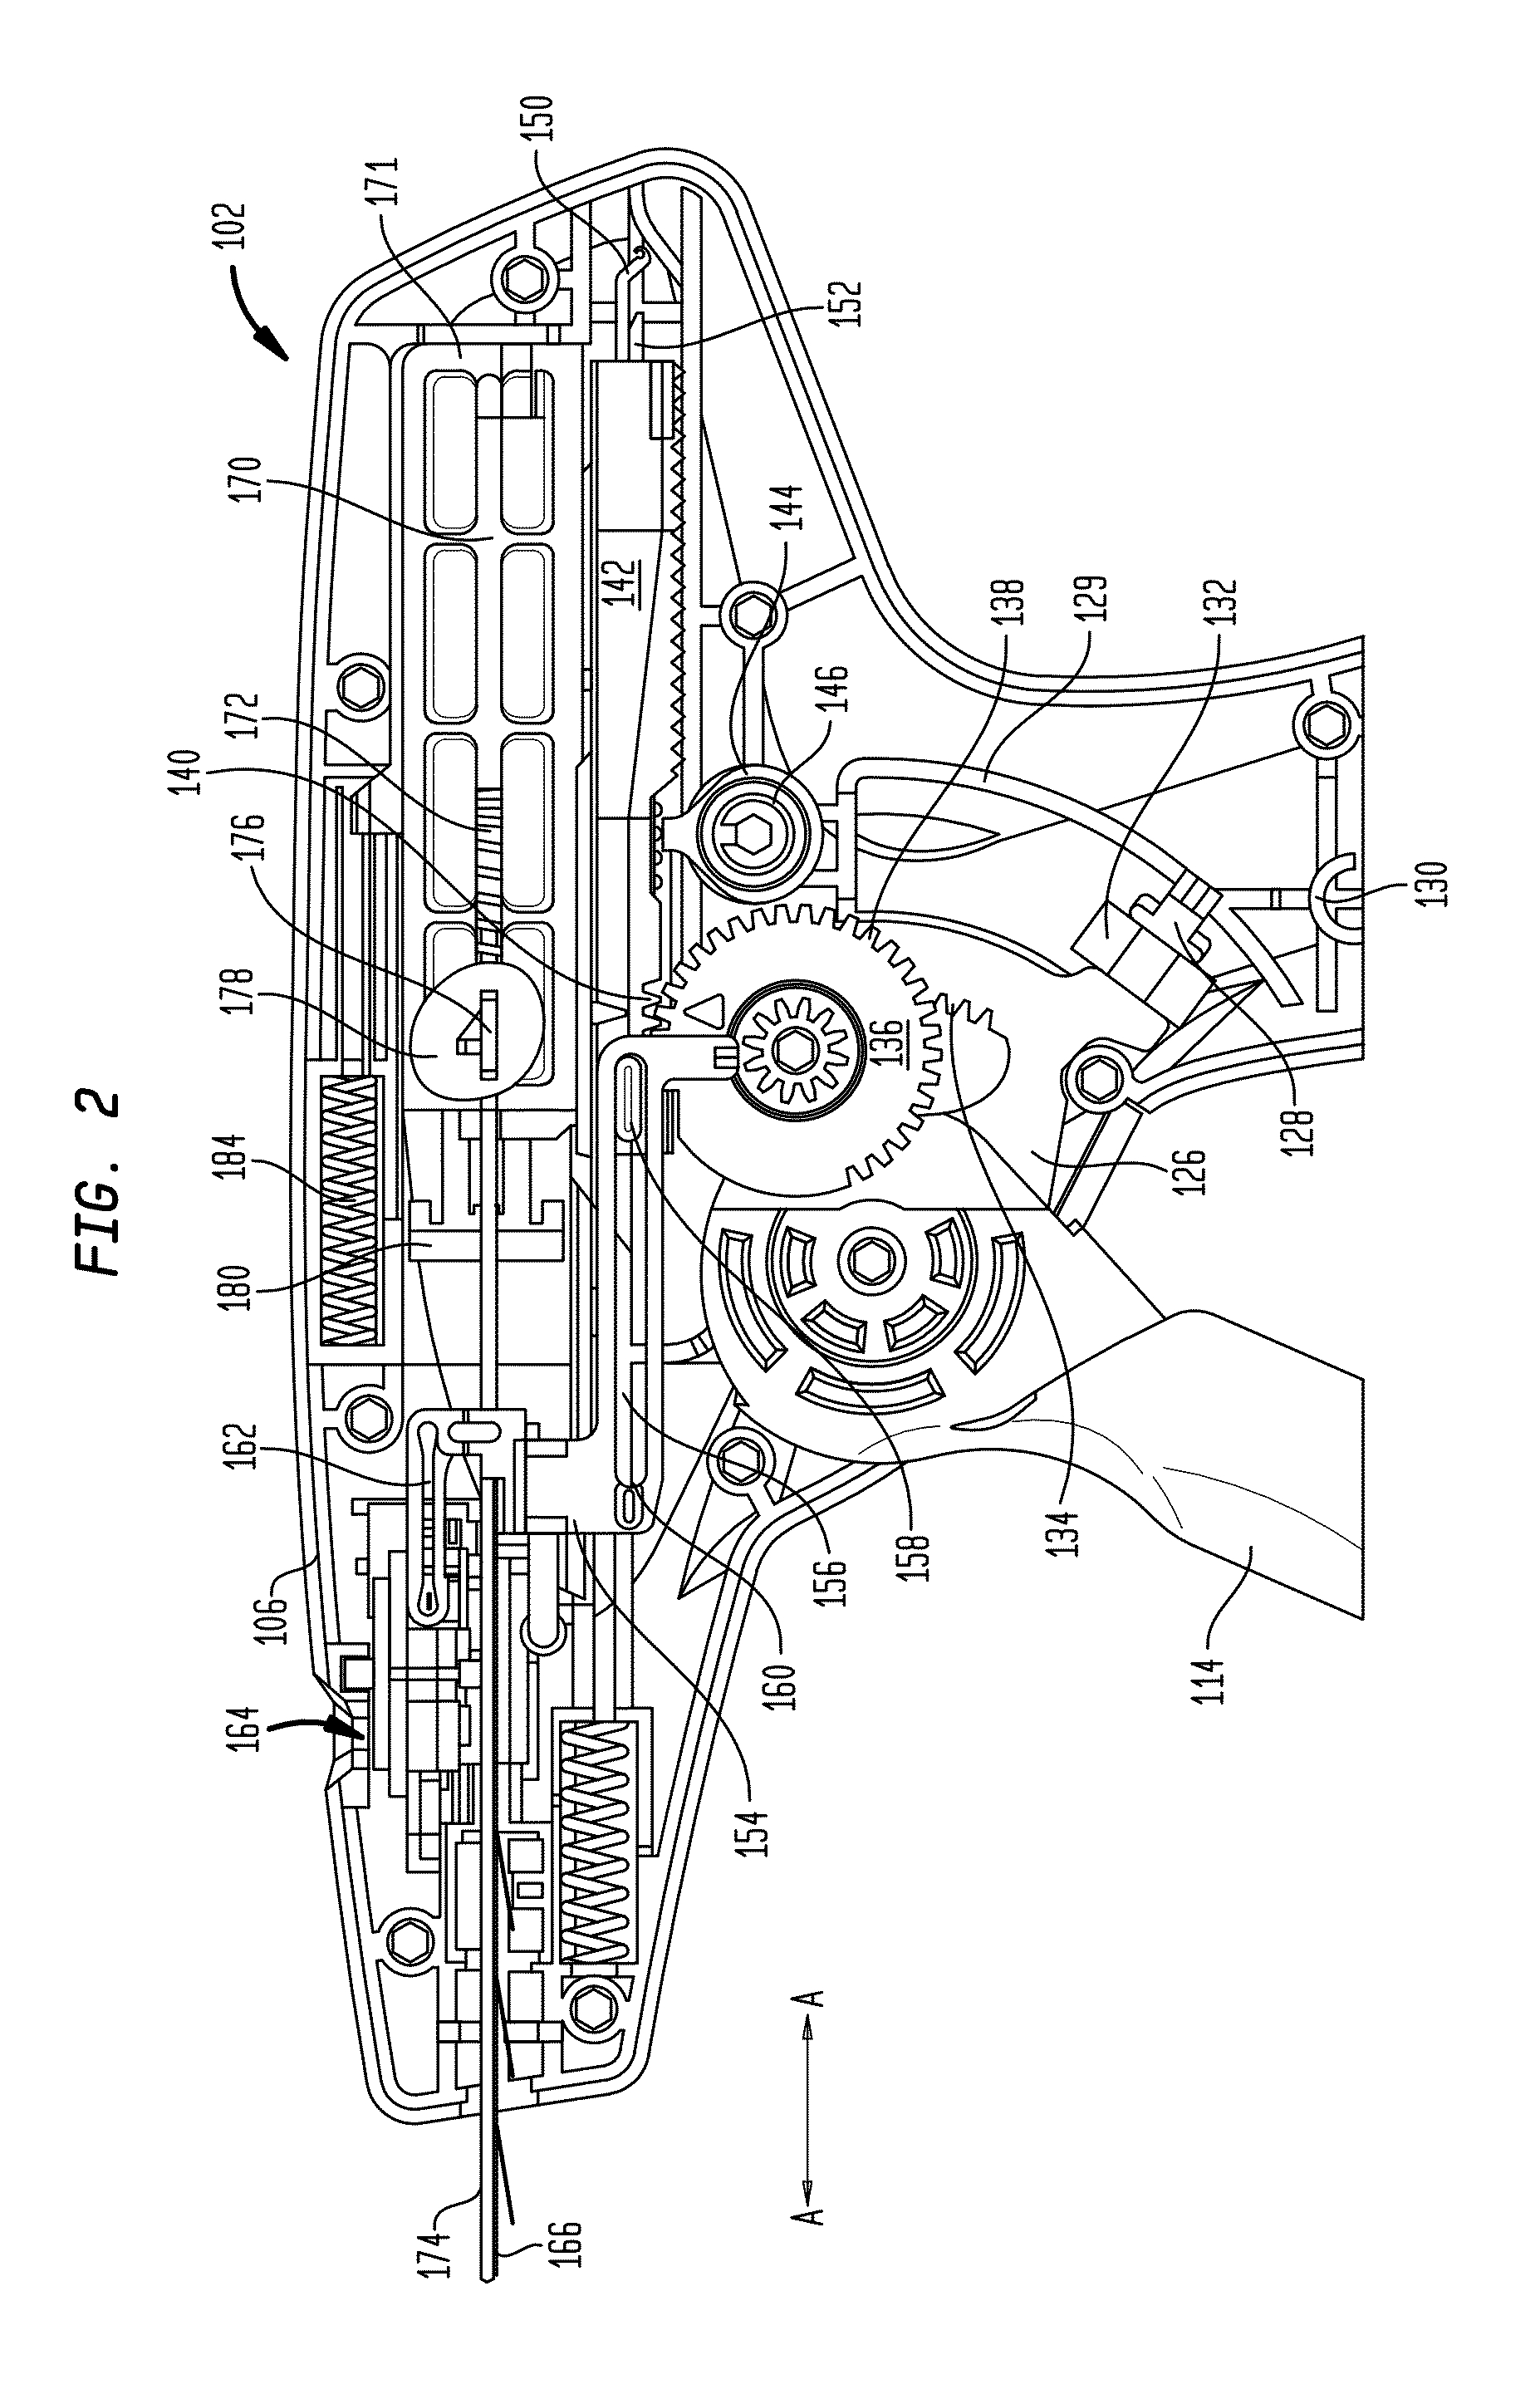 Surgical fasteners having articulating joints and deflectable tips